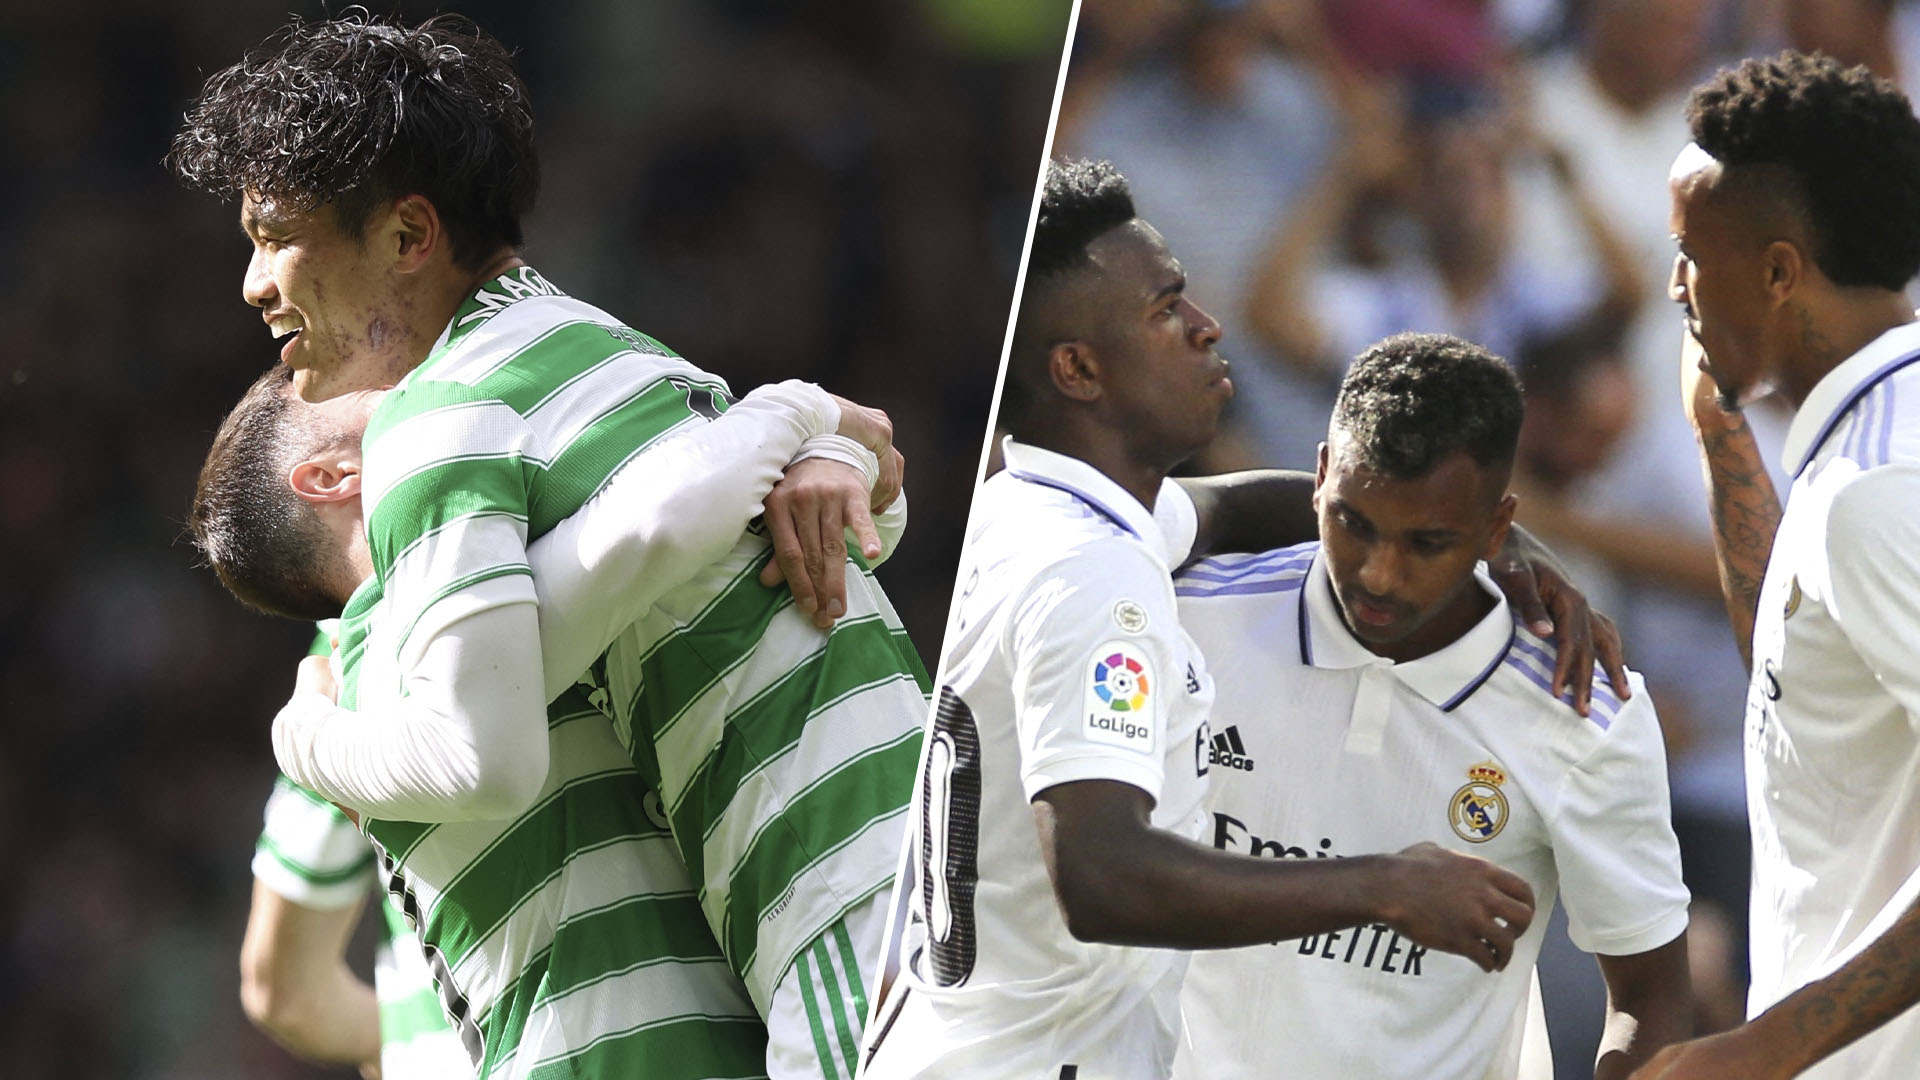 Celtic Will Play Against Mighty Real Madrid At Home On The First Date Of The 2022/23 Uefa Champions League.